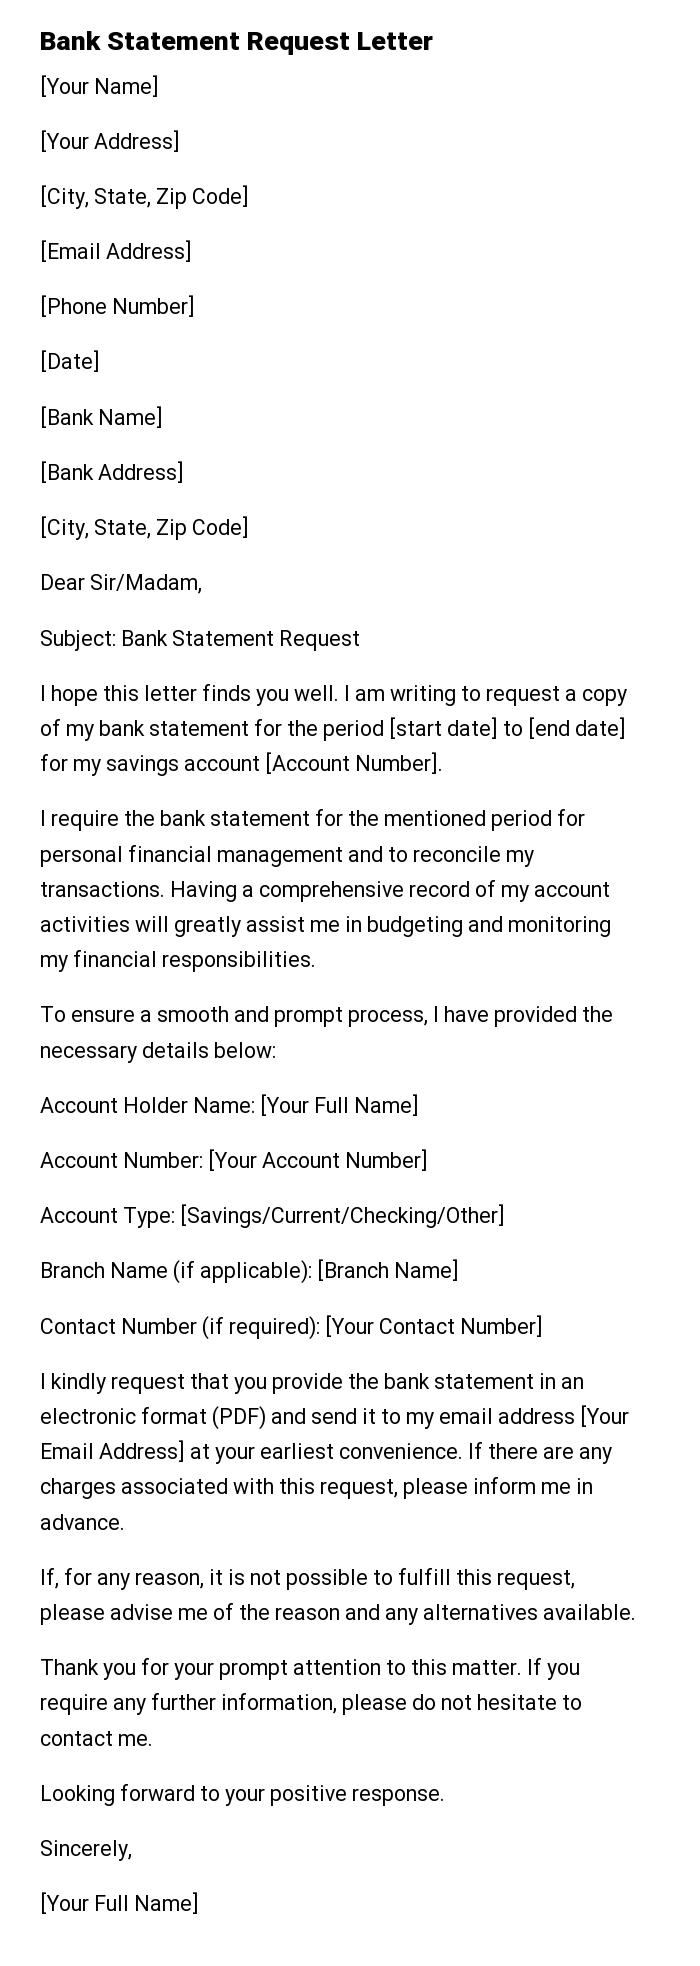 Bank Statement Request Letter